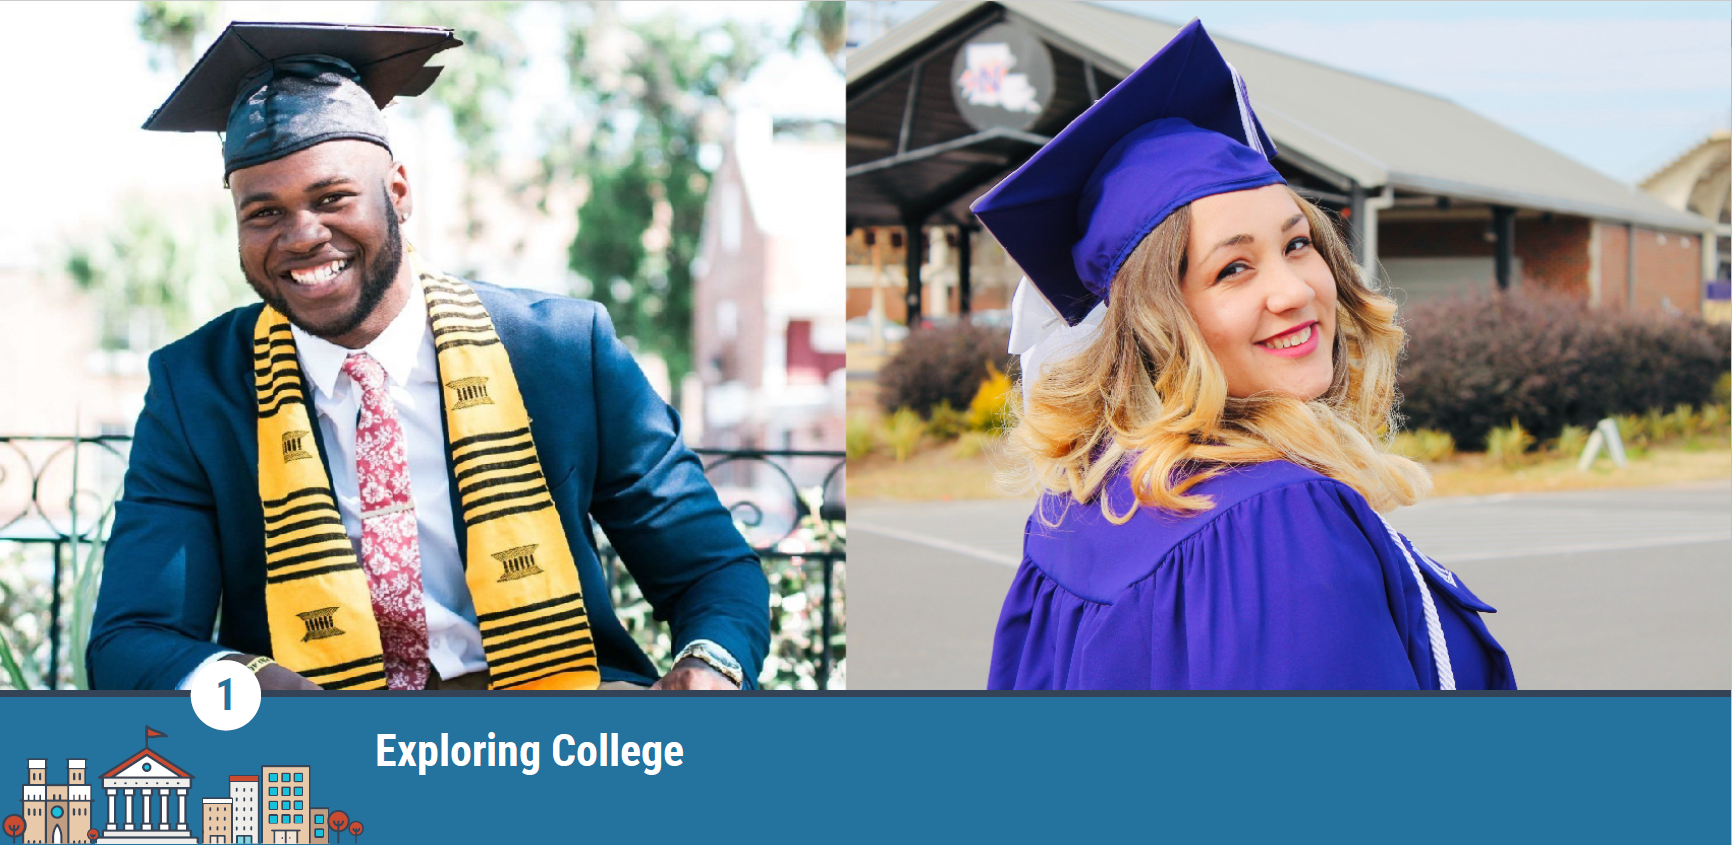 The photo on the left shows an African male student in academic dress sitting outdoors and smiling at the camera. The outdoor photo on the right shows a Caucasian female student smiling at the camera.